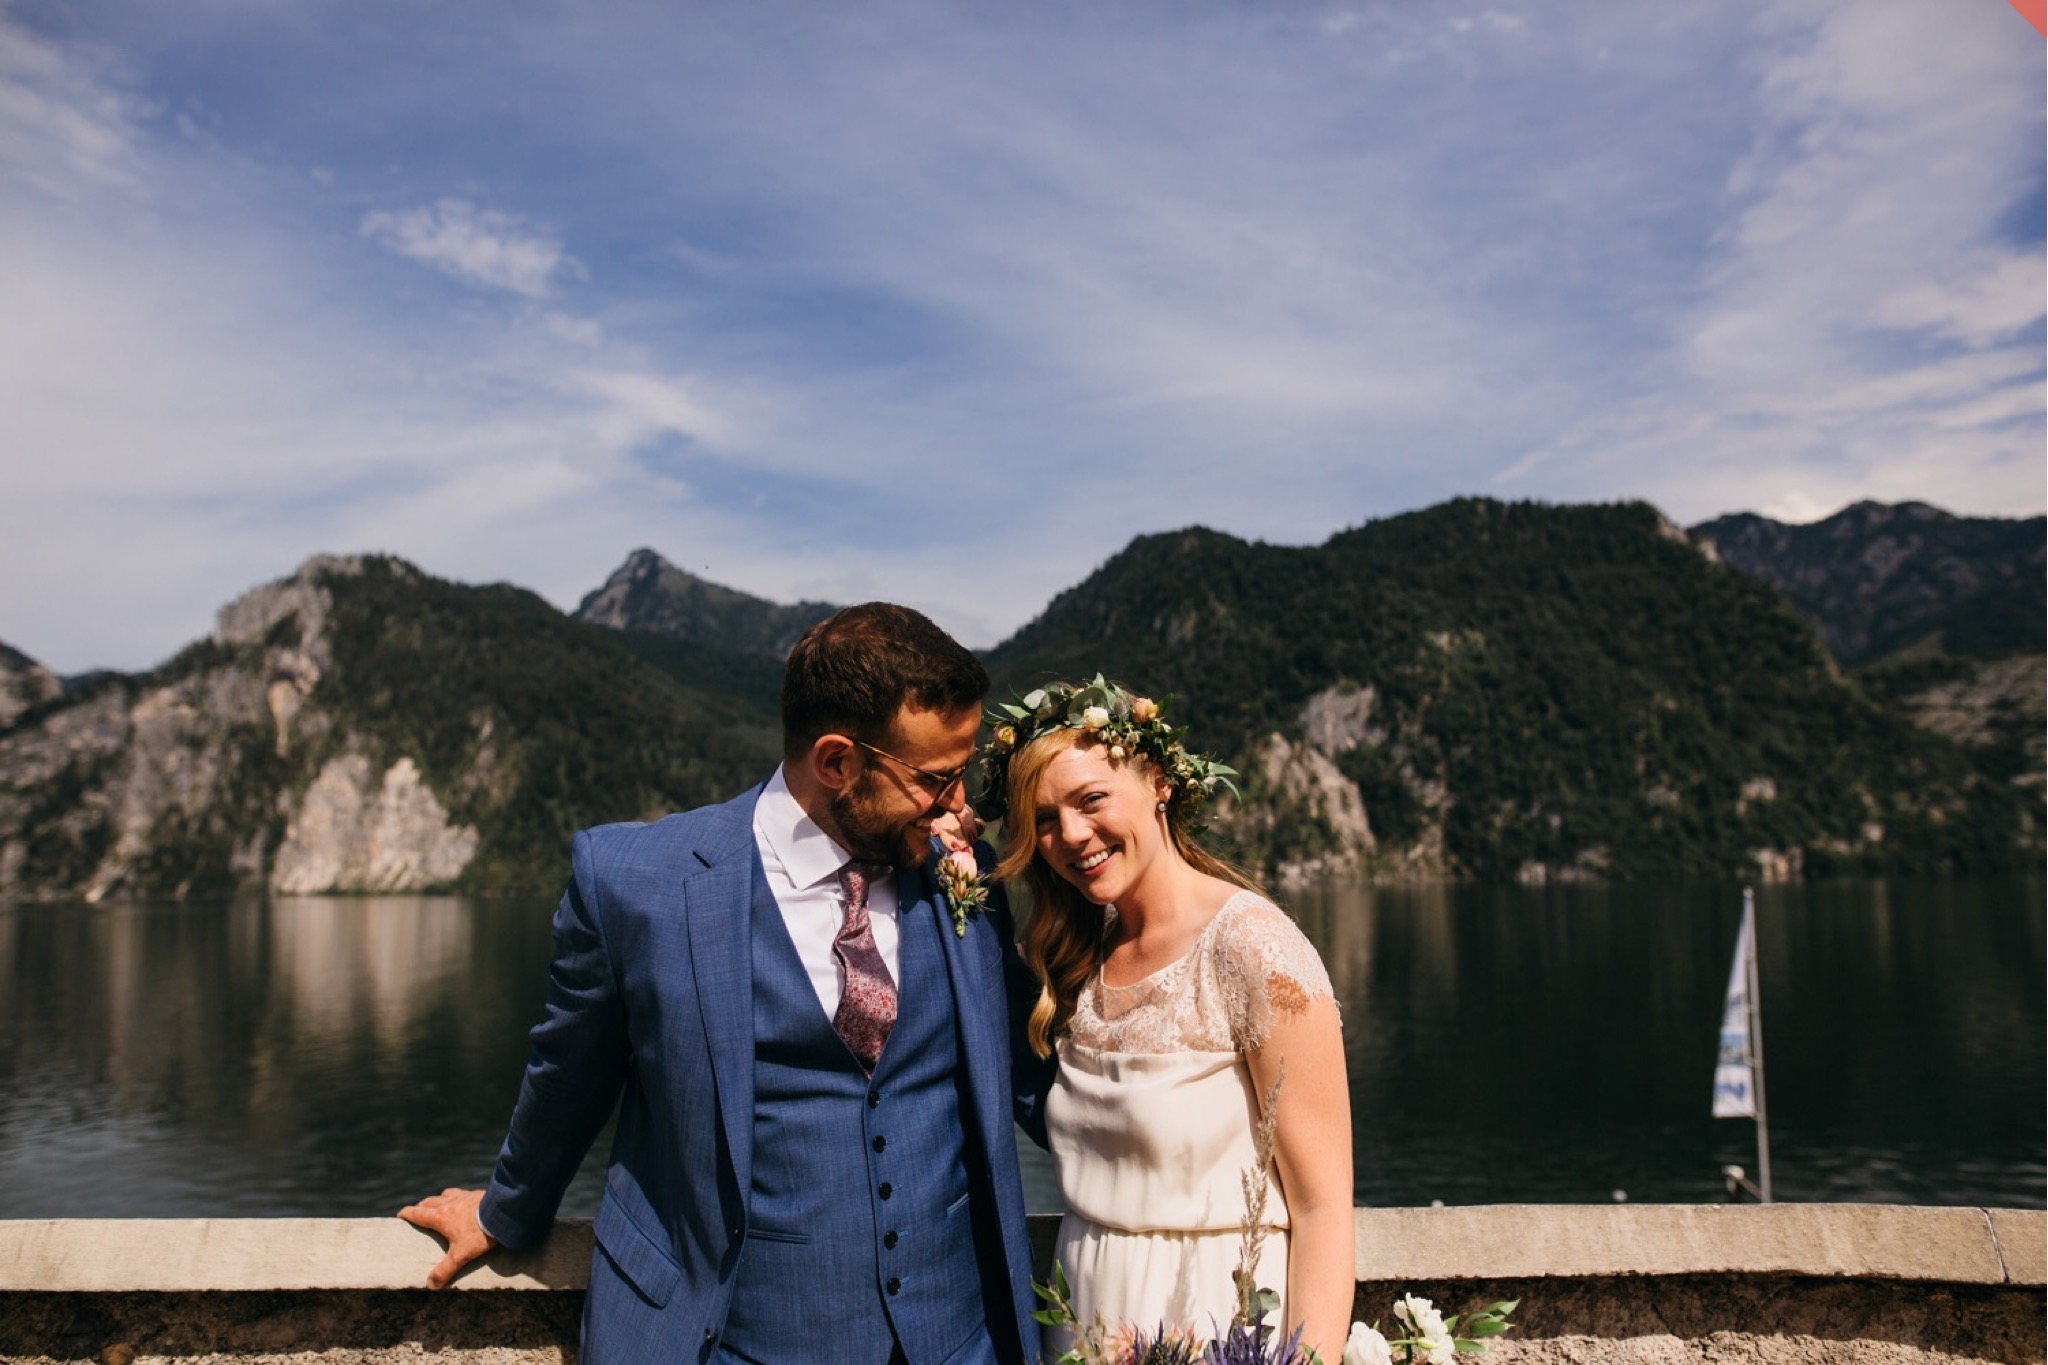 Bride and groom laugh together in front of an alpine lake.